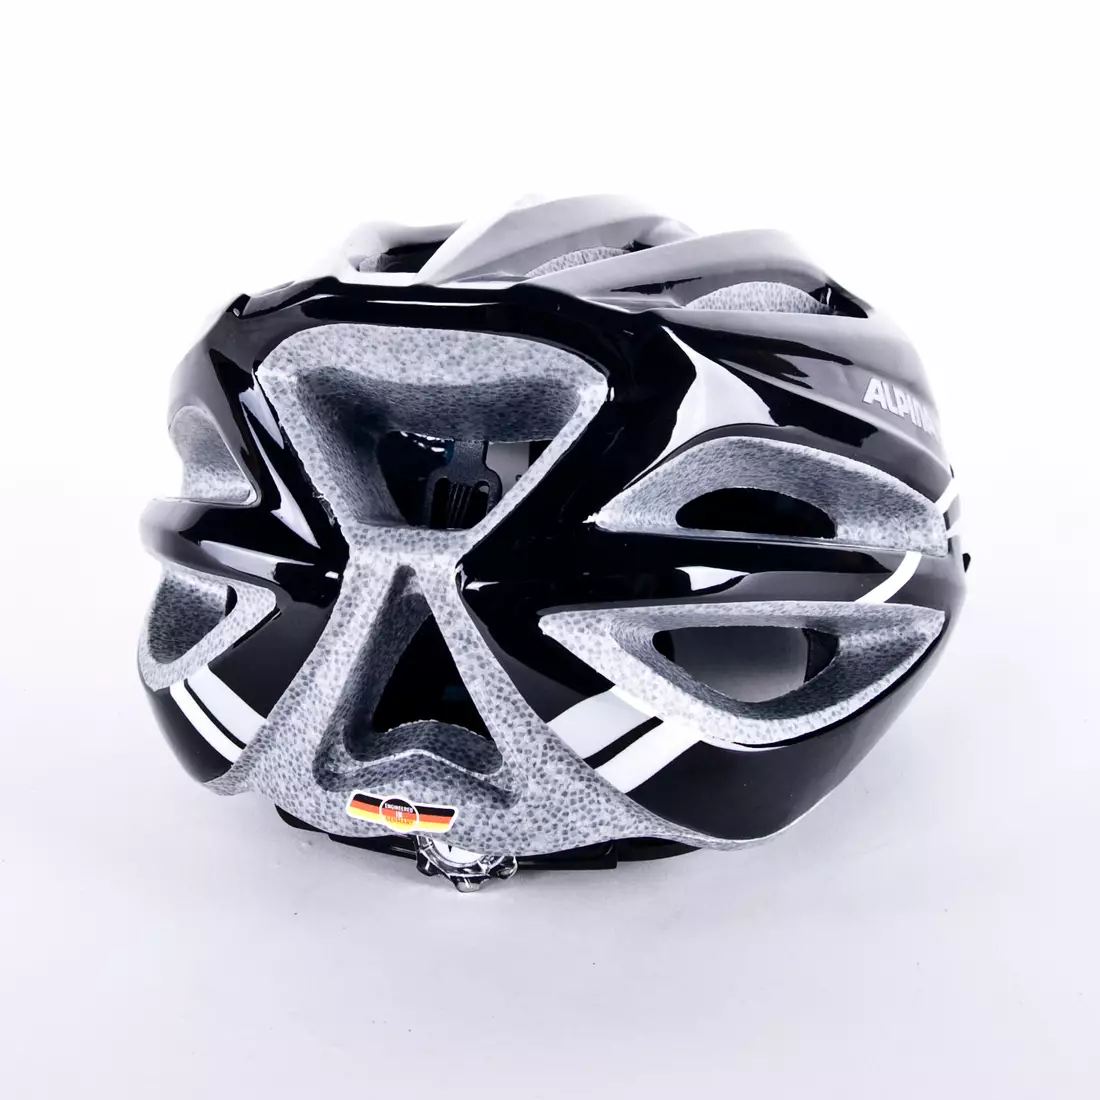 ALPINA TOUR 2.0 bicycle helmet black, silver and white